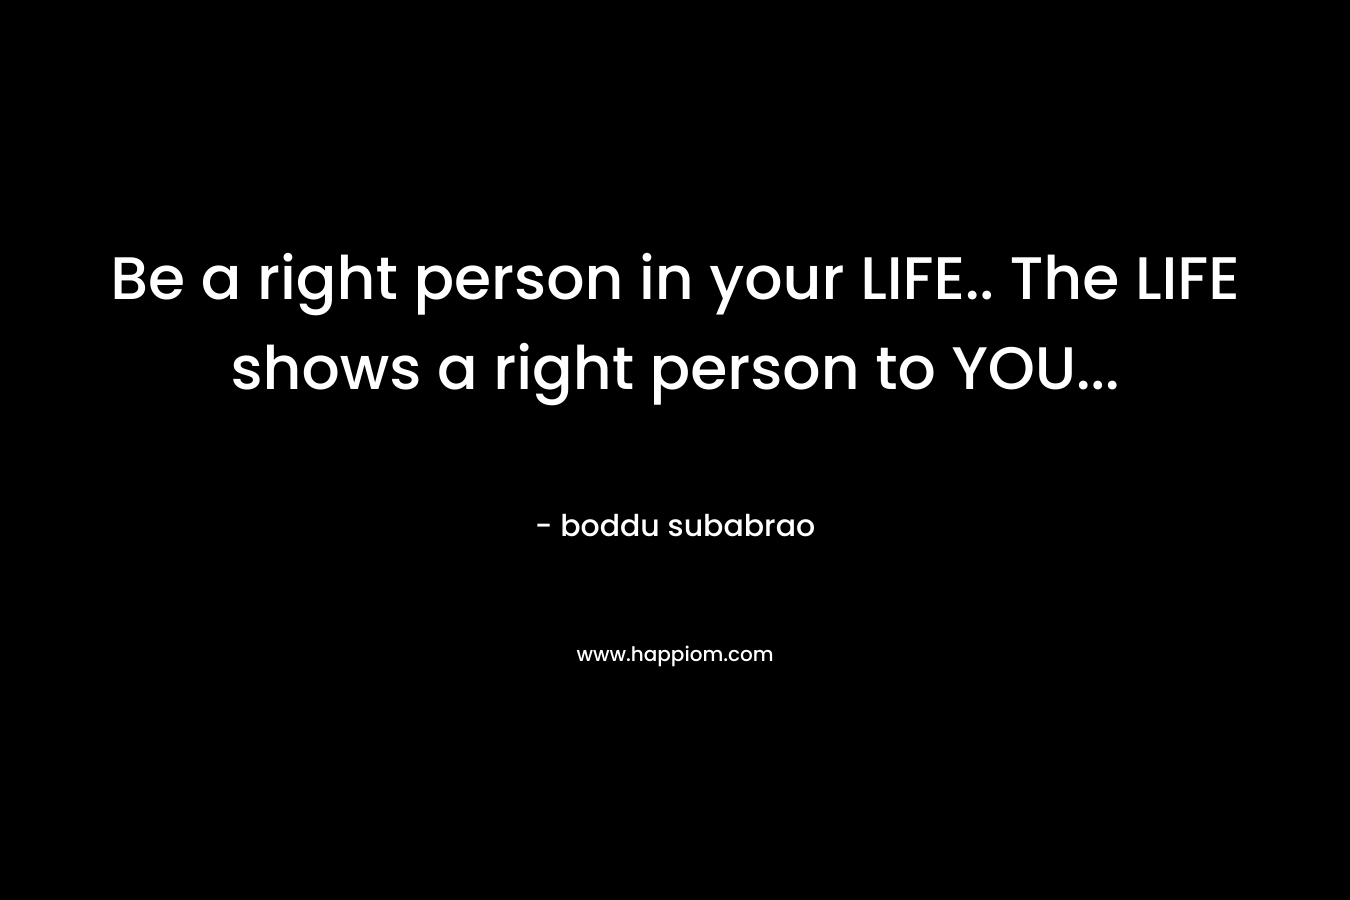 Be a right person in your LIFE.. The LIFE shows a right person to YOU...